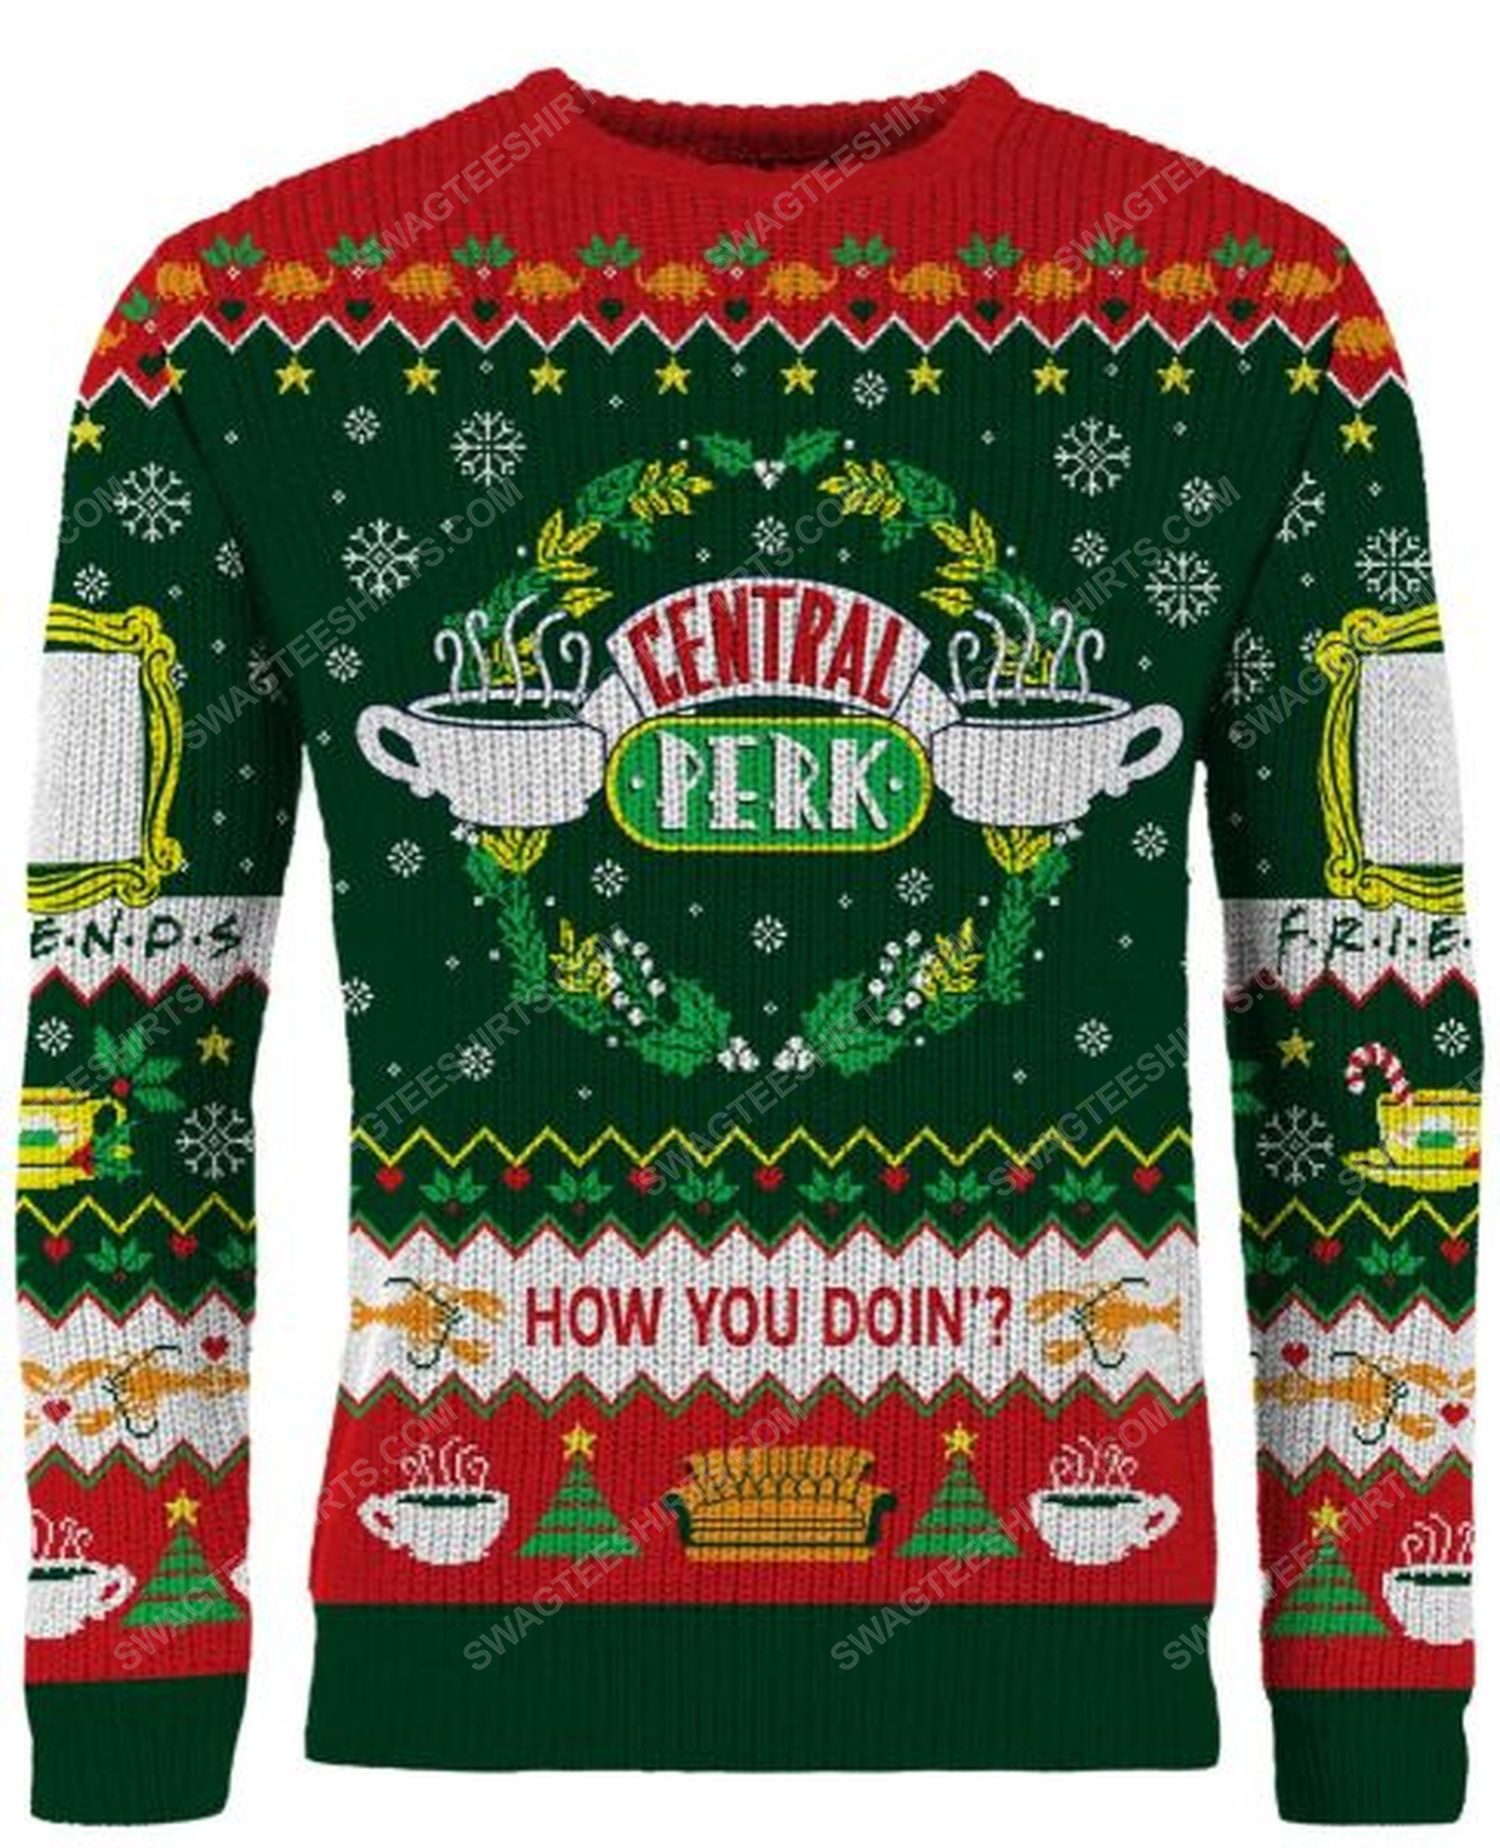 [special edition] Central perk holiday how you doin full print ugly christmas sweater – maria